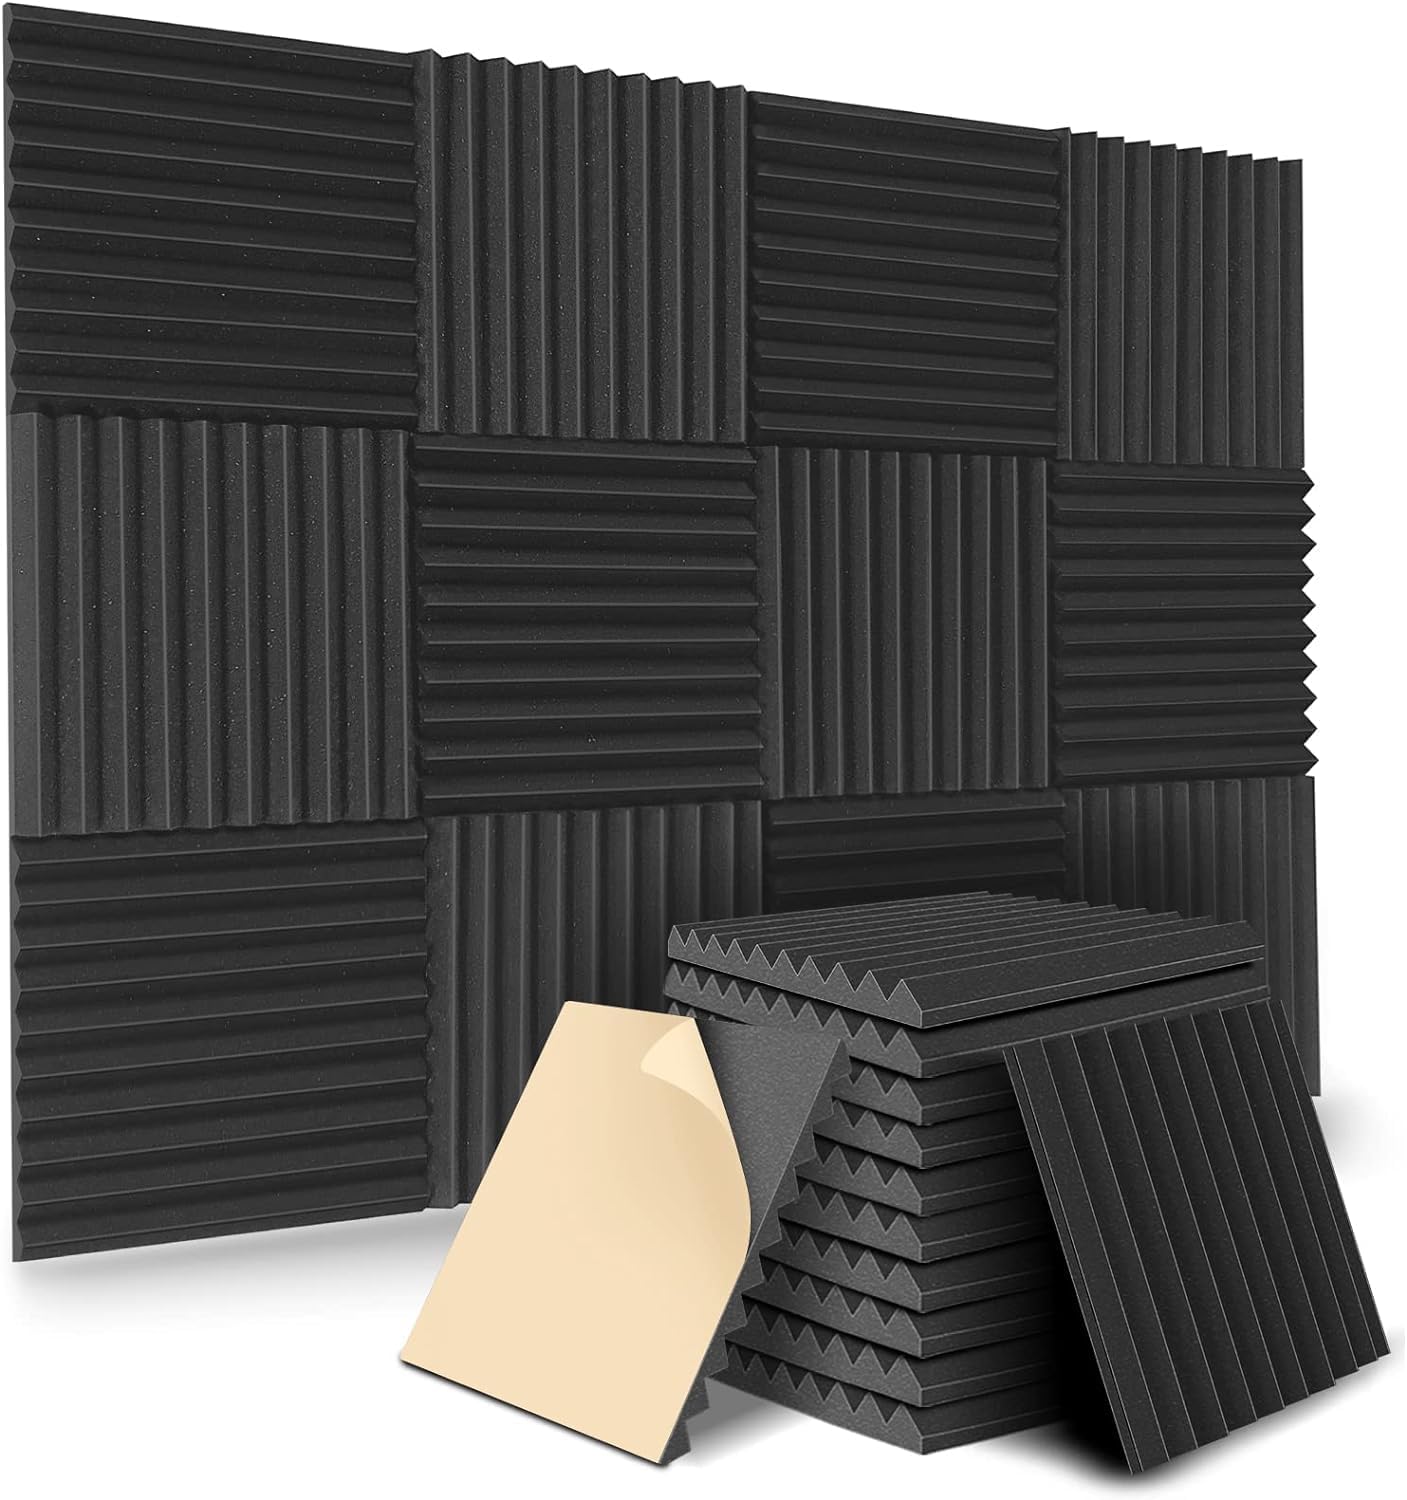 12Packs Black Self-Adhesive Acoustic Foam Sound Insulation Fire Resistant Wall Panels High-density - Office Catch